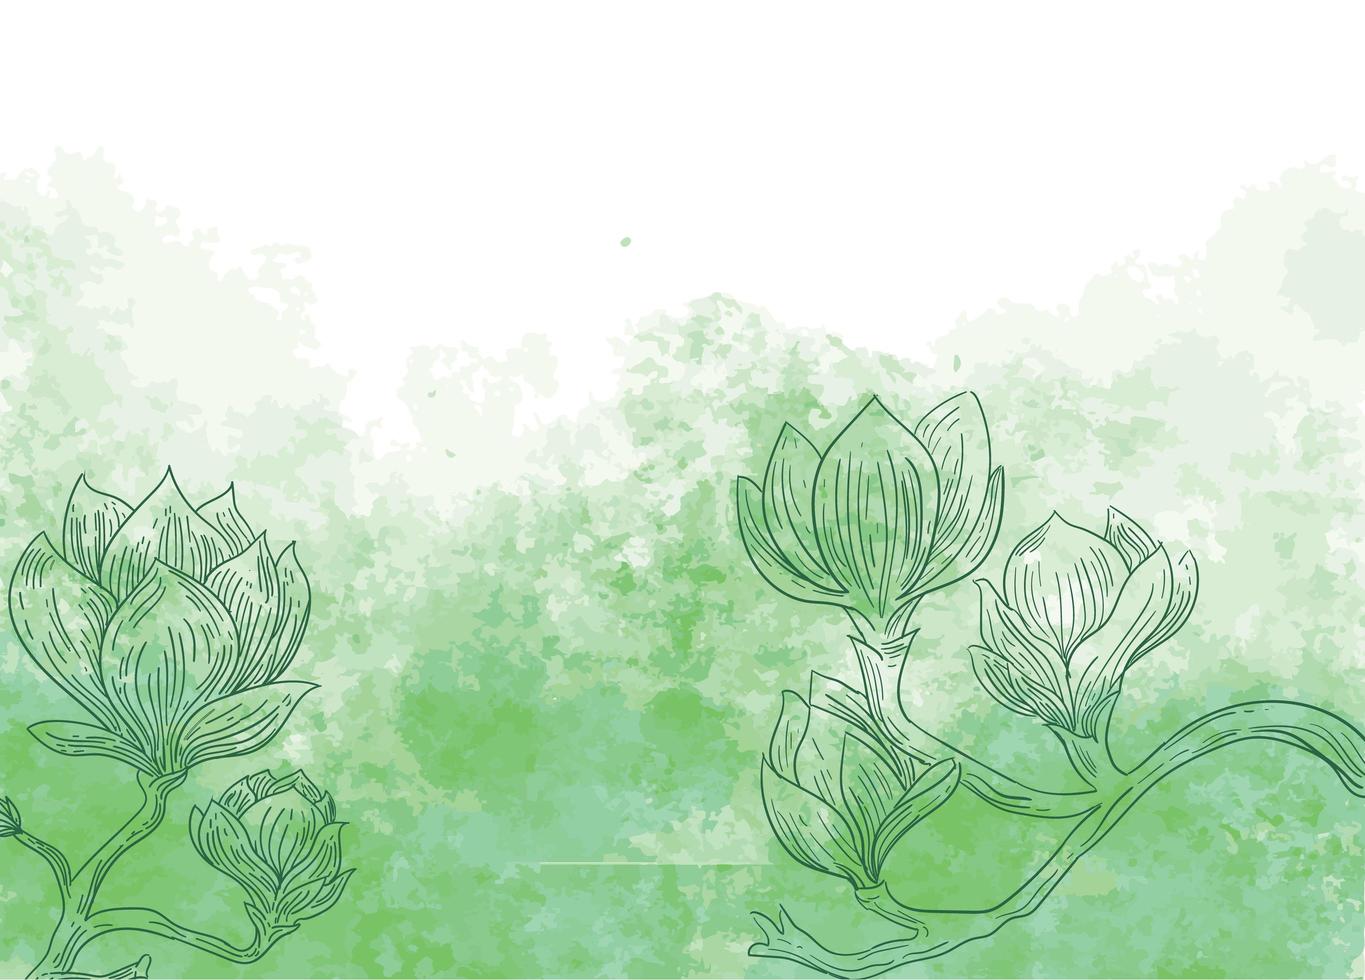 Flowers on green watercolor background vector